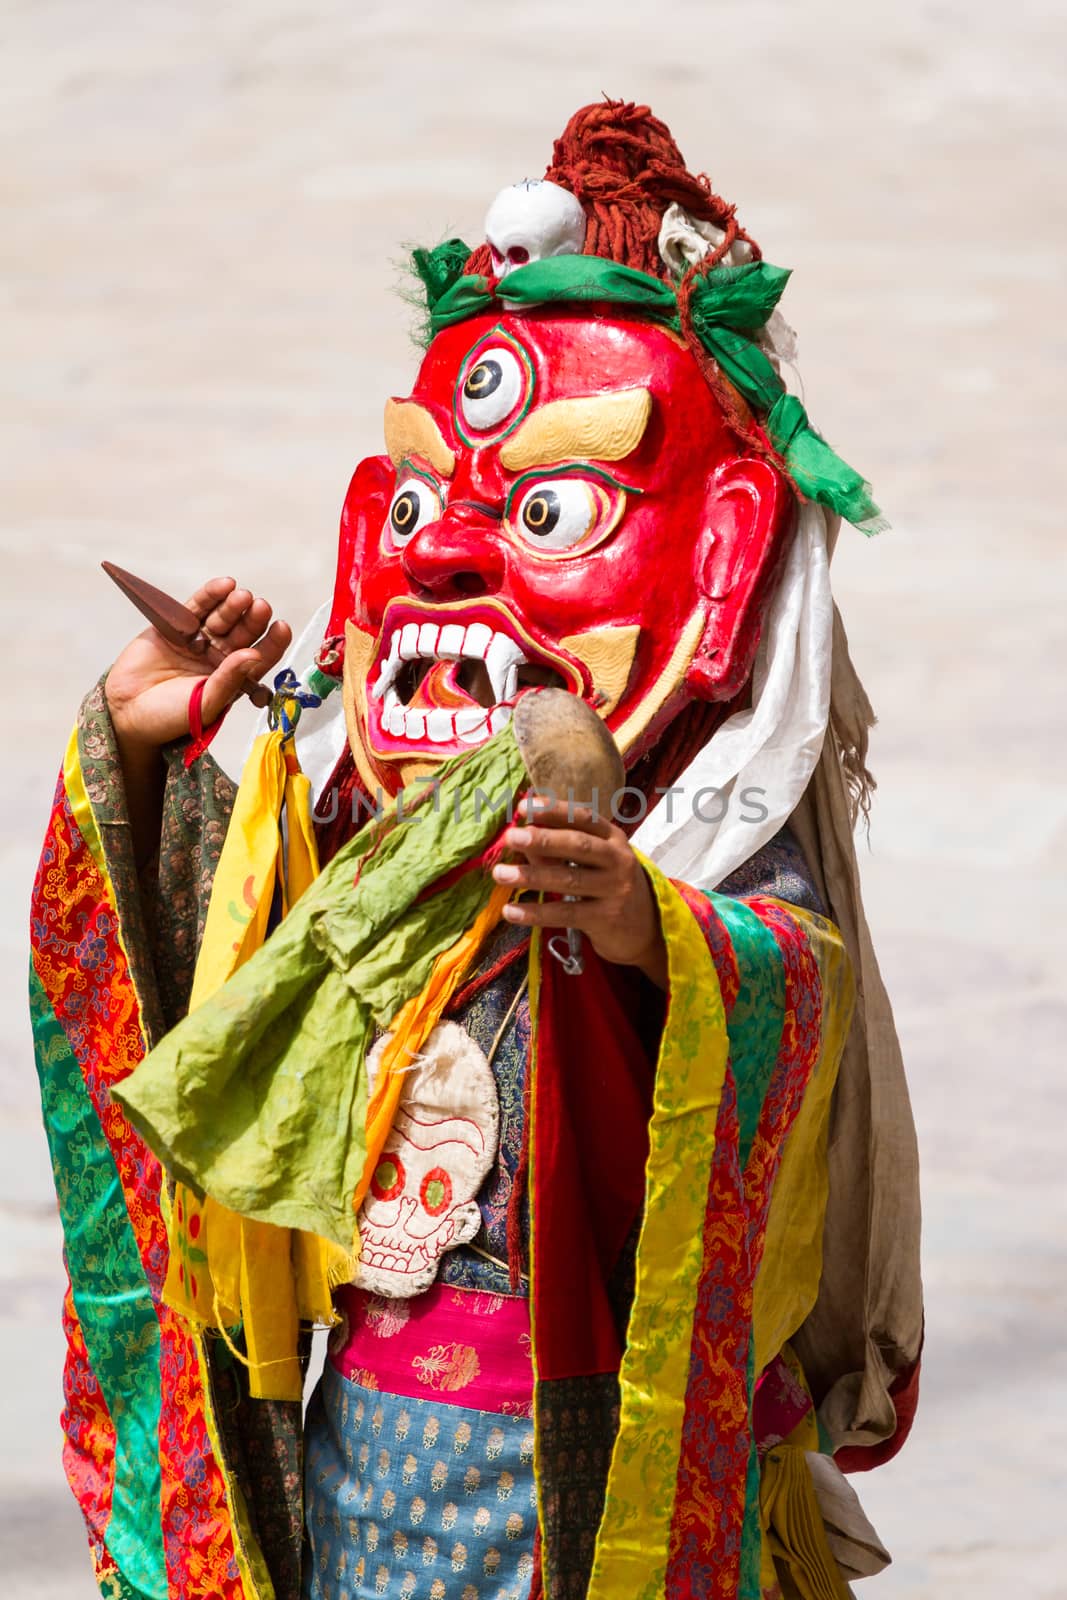 Unidentified monk with phurpa (ritual knife) performs a religious masked and costumed mystery dance of Tibetan Buddhism during the Cham Dance Festival in Hemis monastery, India.